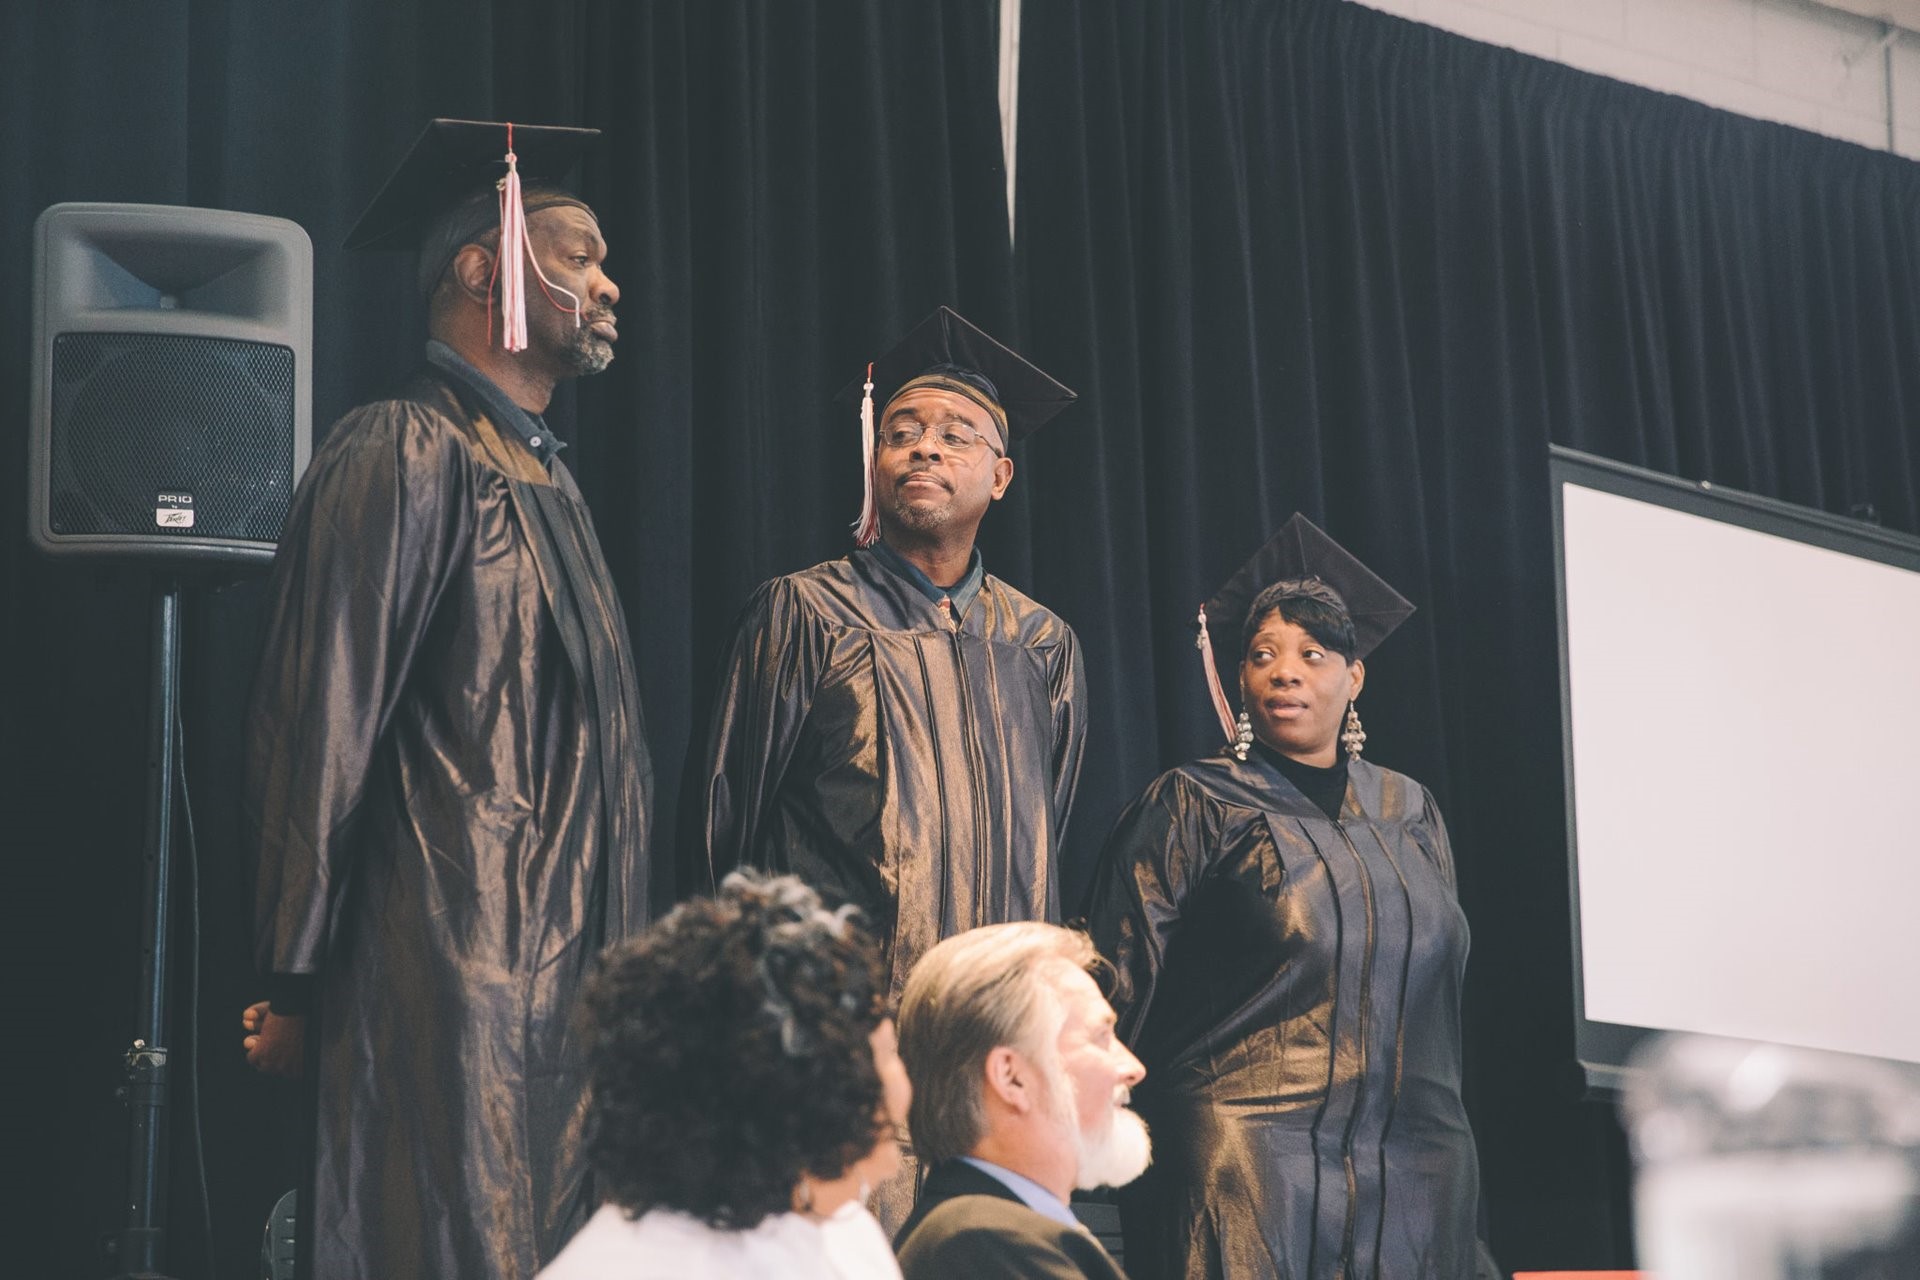 A recent class of Transformation Program graduates are recognized at the Harvest Center.